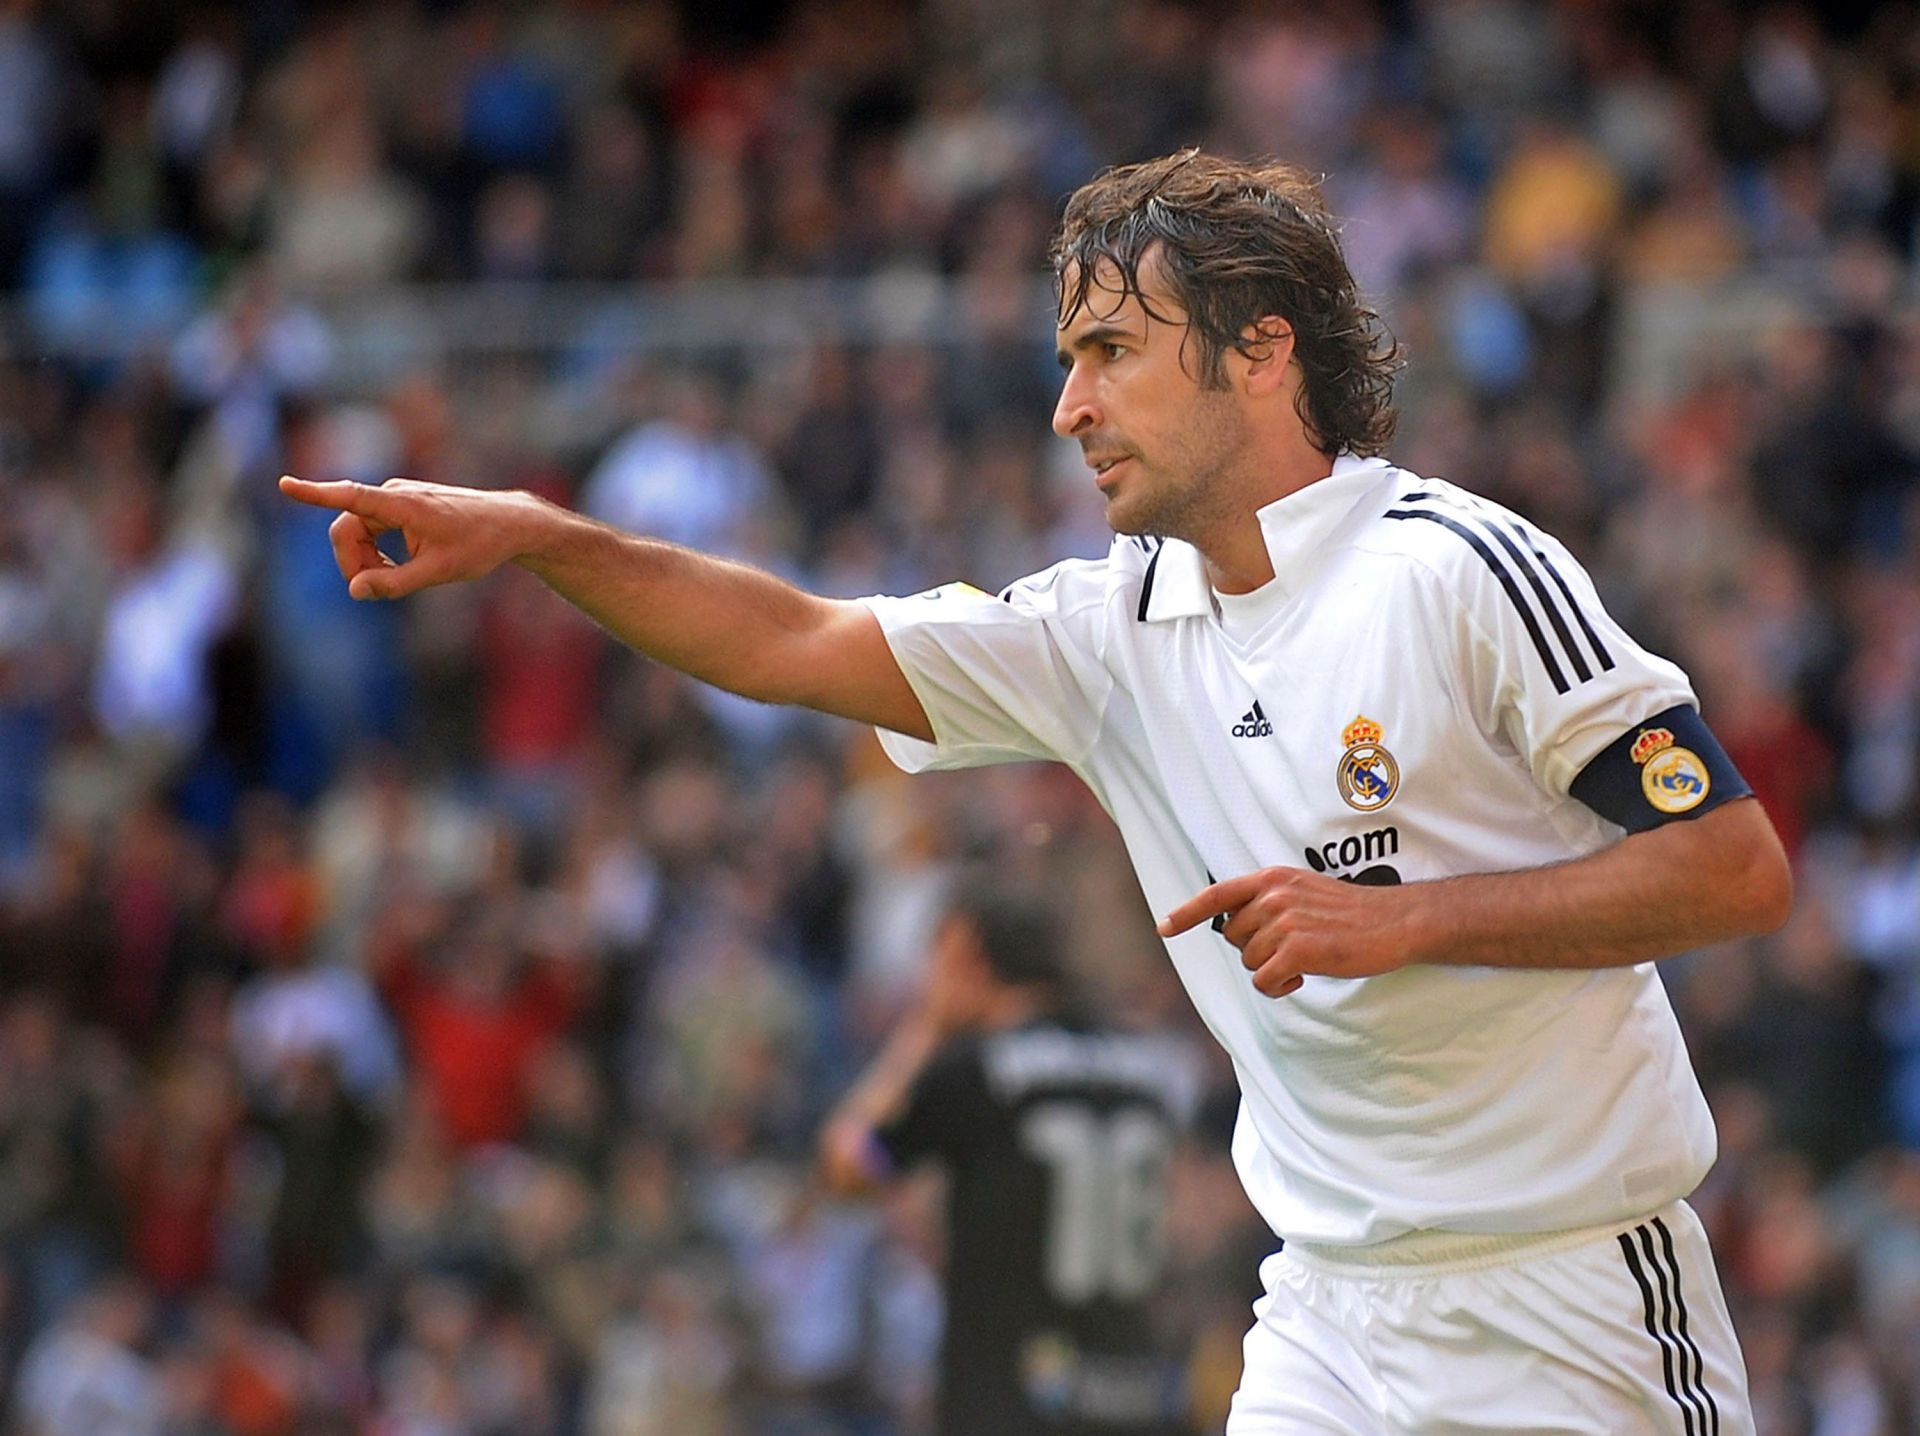 Raul is a Real Madrid legend